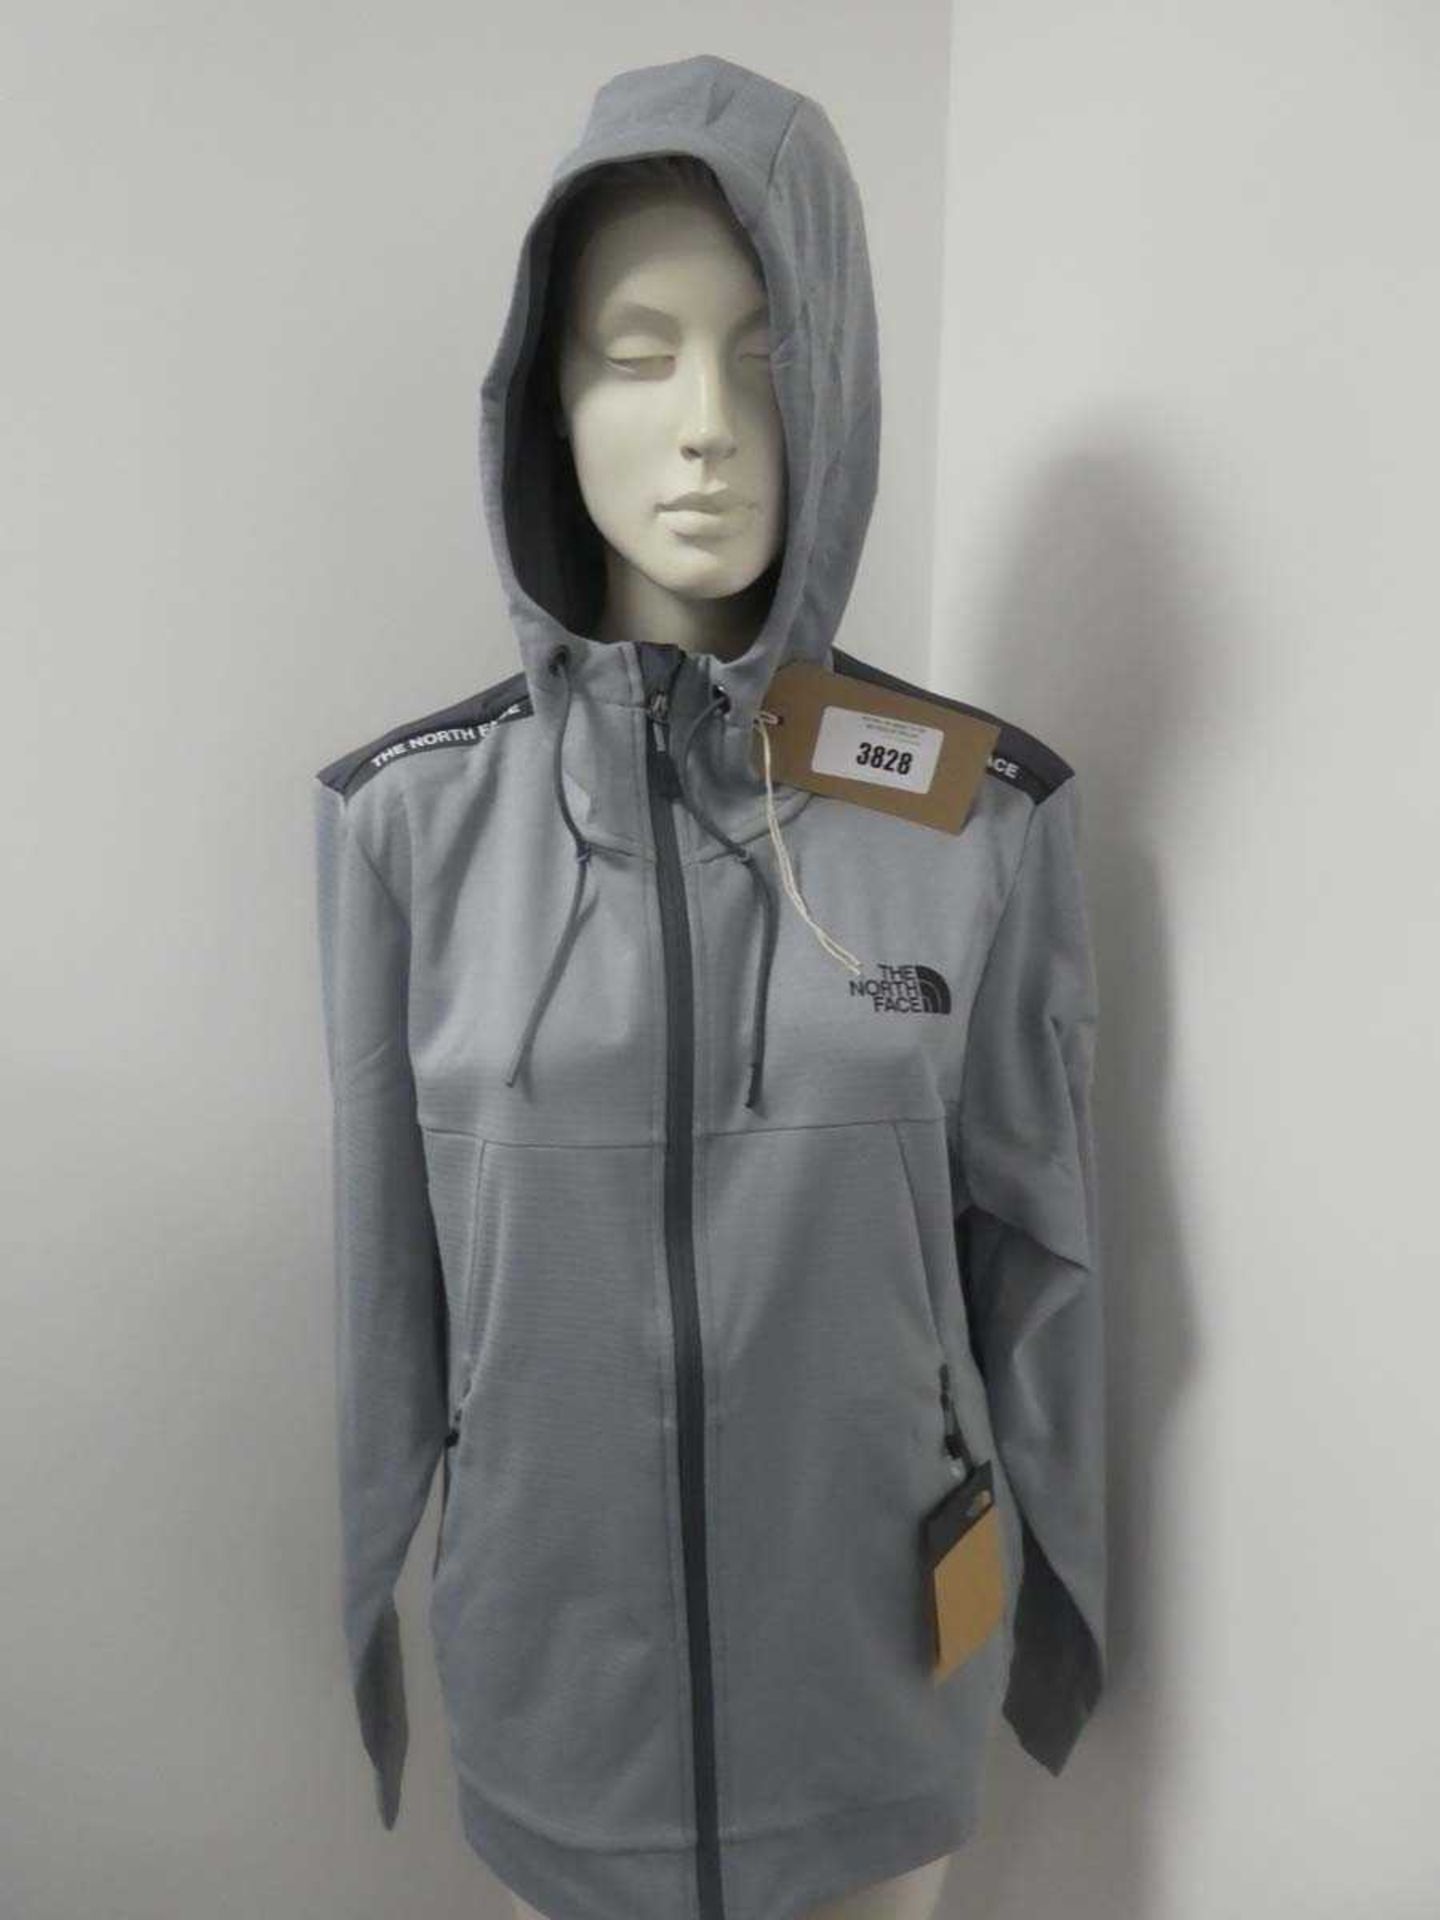 +VAT The North Face ampere tape mid grey jacket size medium (bagged)